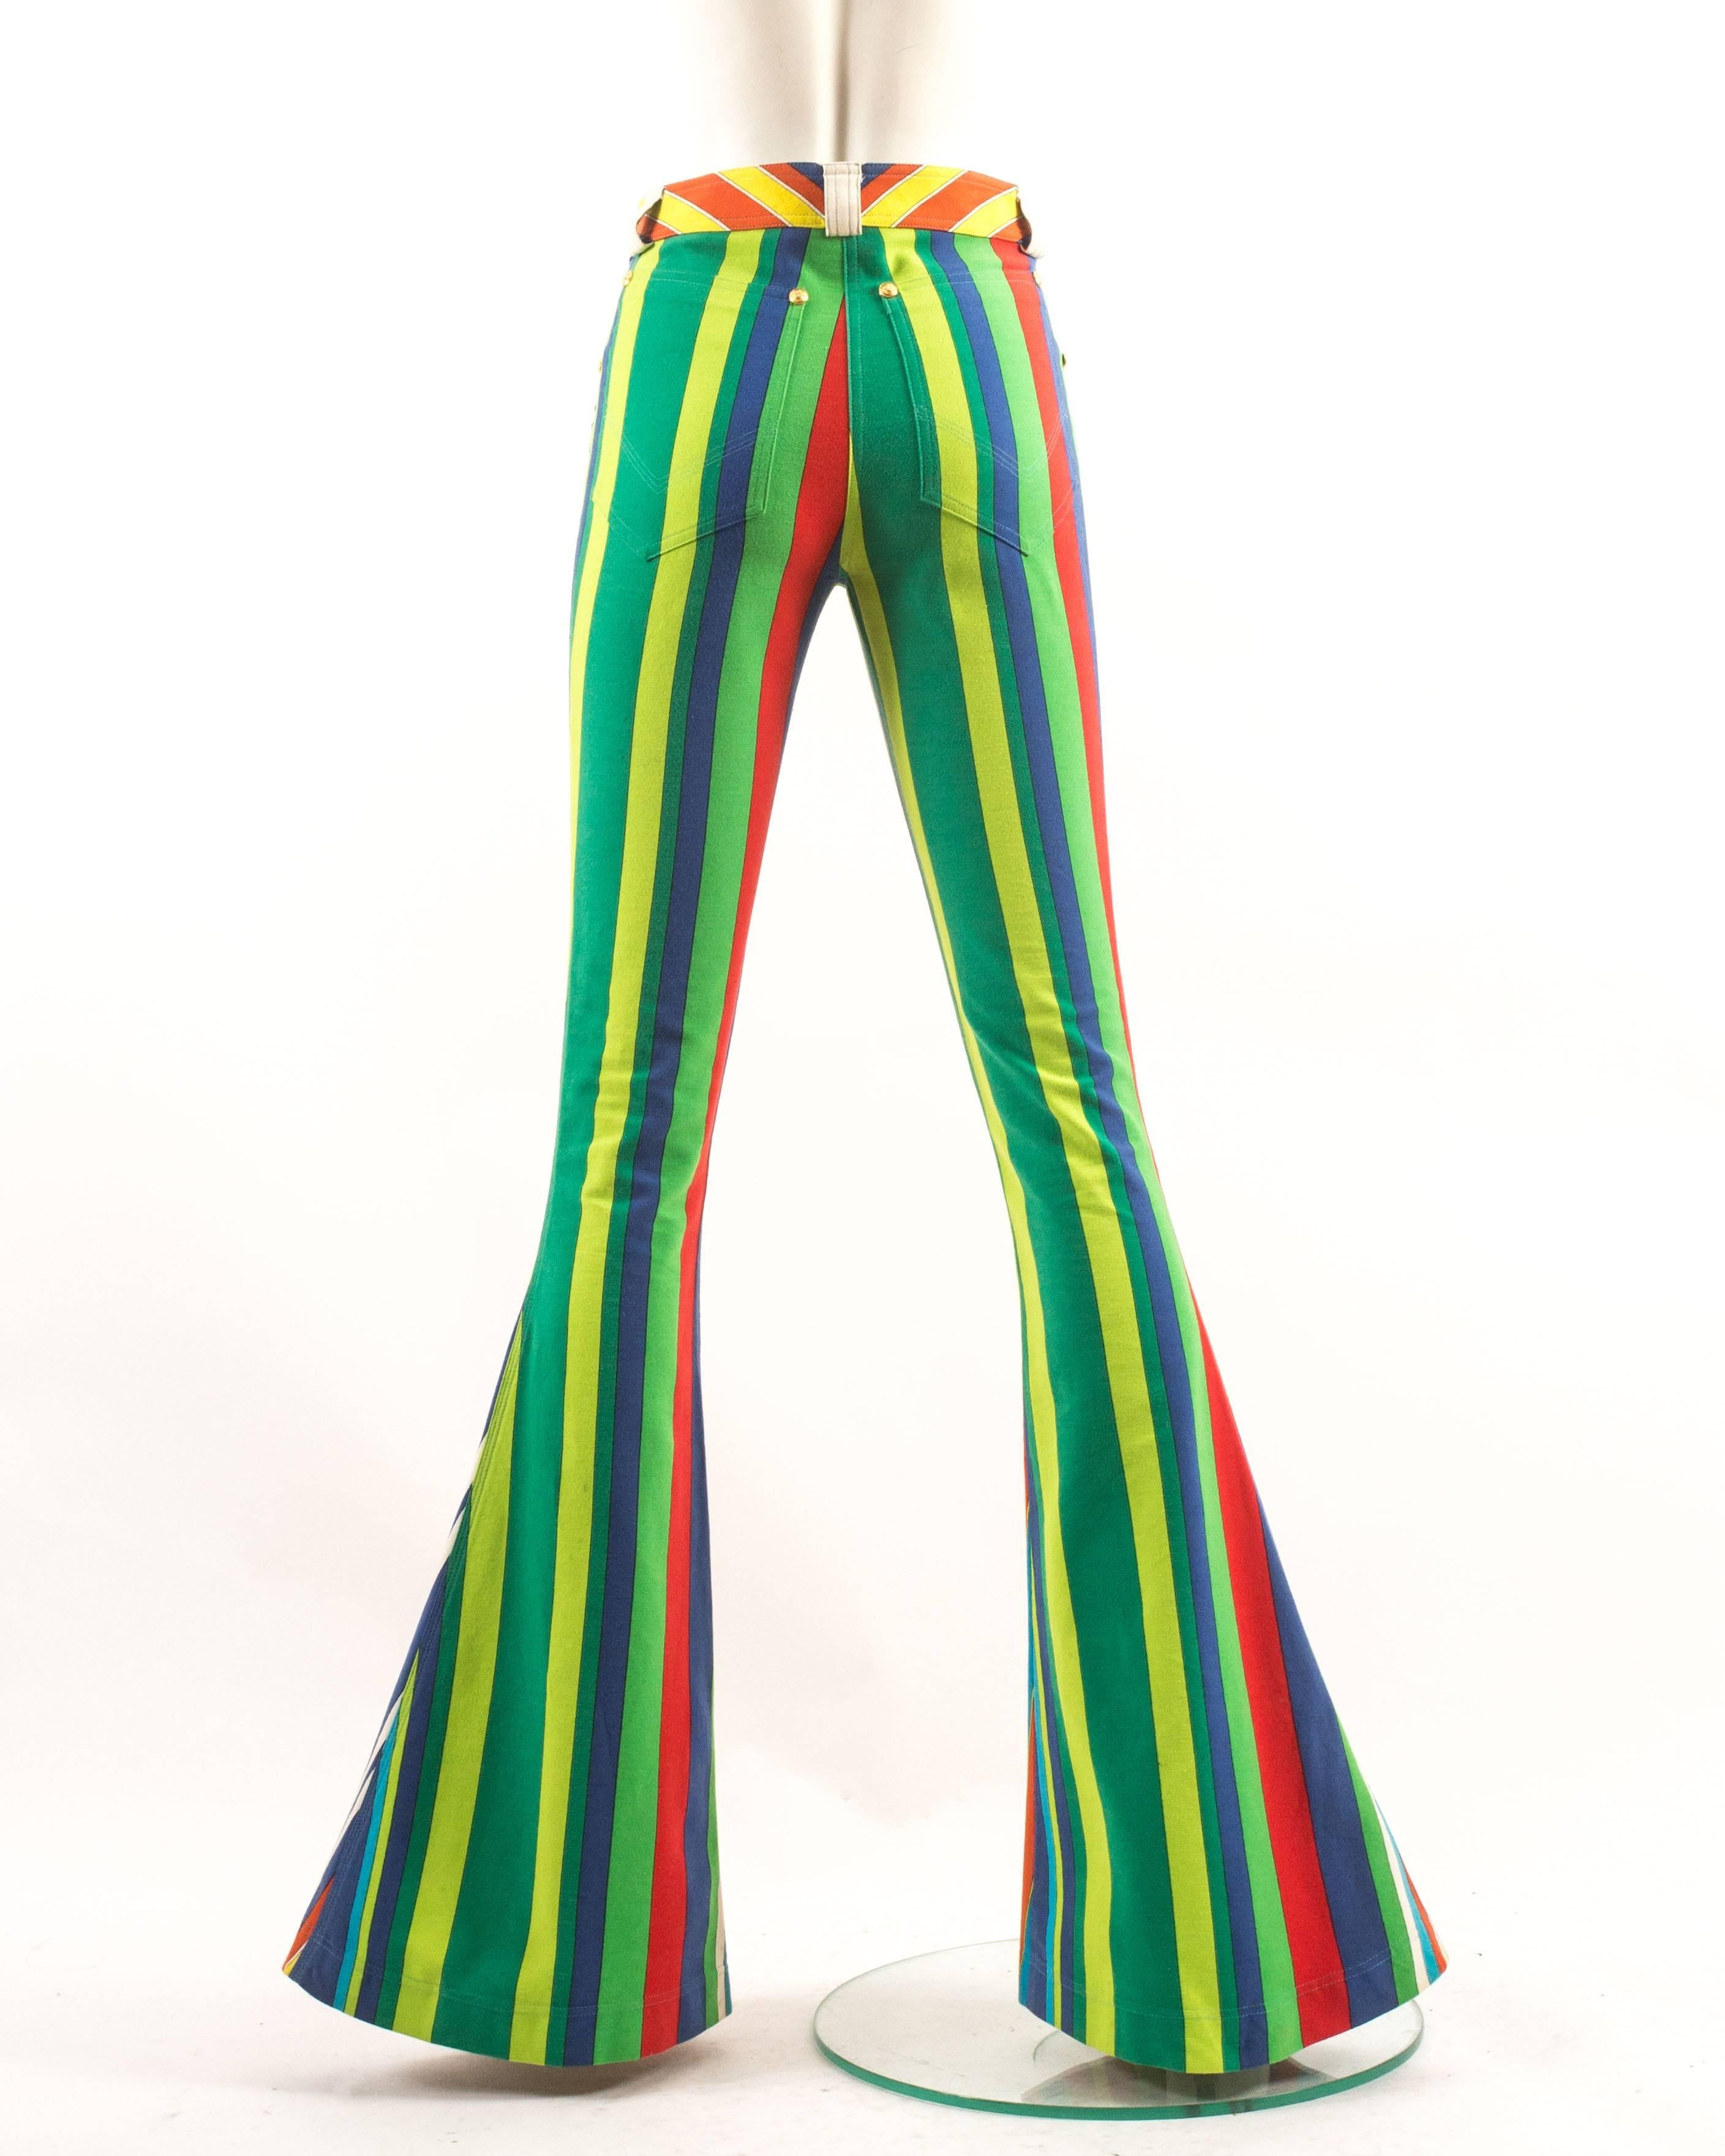 Gianni Versace Spring-Summer 1993 striped extra wide flared pants